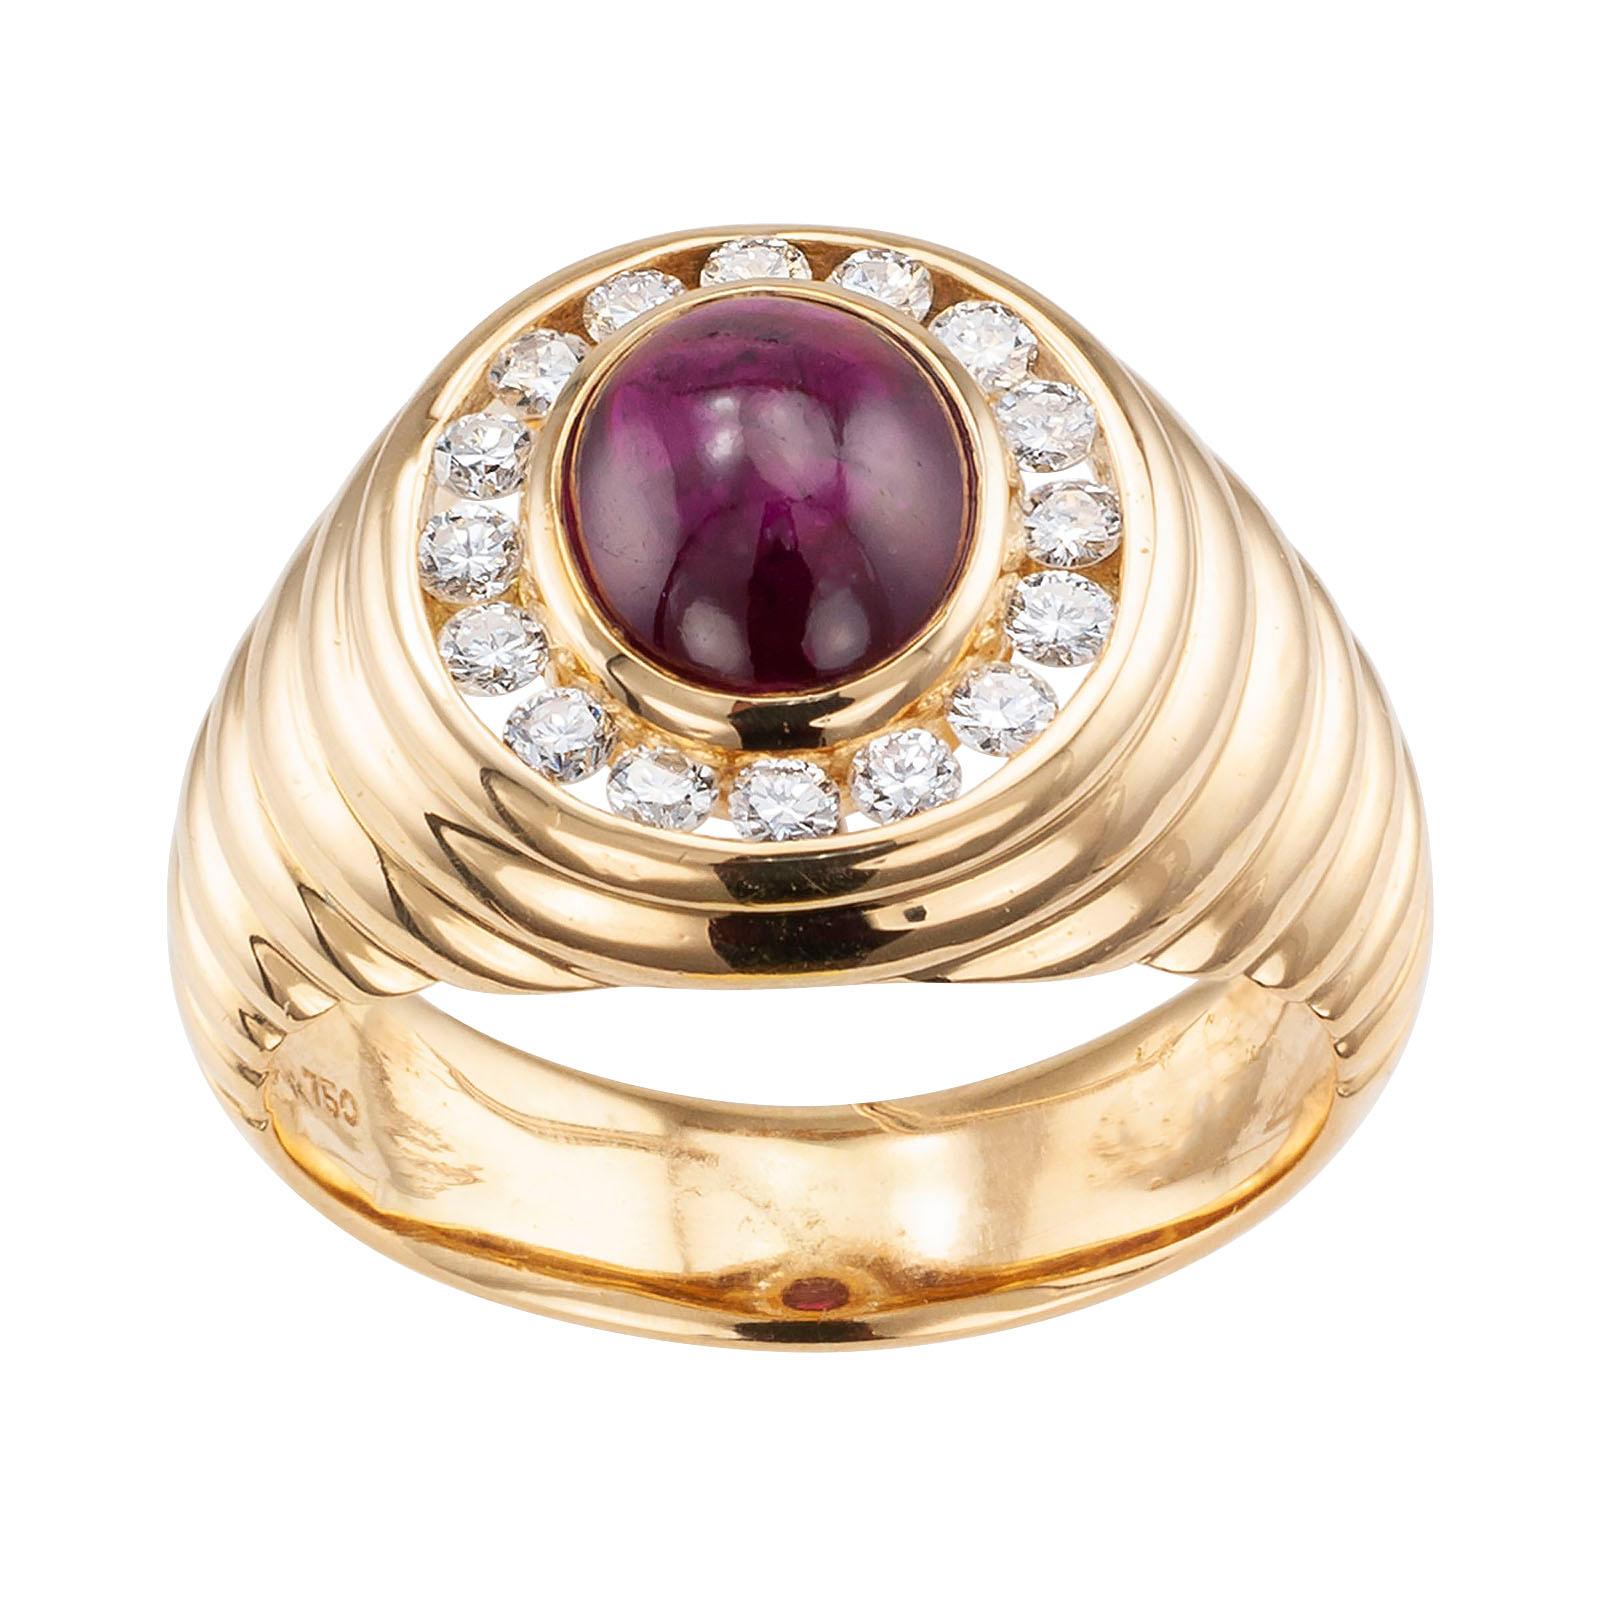 Cabochon ruby diamond and gold gentleman’s estate ring.

DETAILS: 
Gentleman’s cabochon ruby diamond and gold estate ring.
DIAMONDS: sixteen round brilliant-cut diamonds totaling approximately 0.40 carat, approximately H – I color and VS